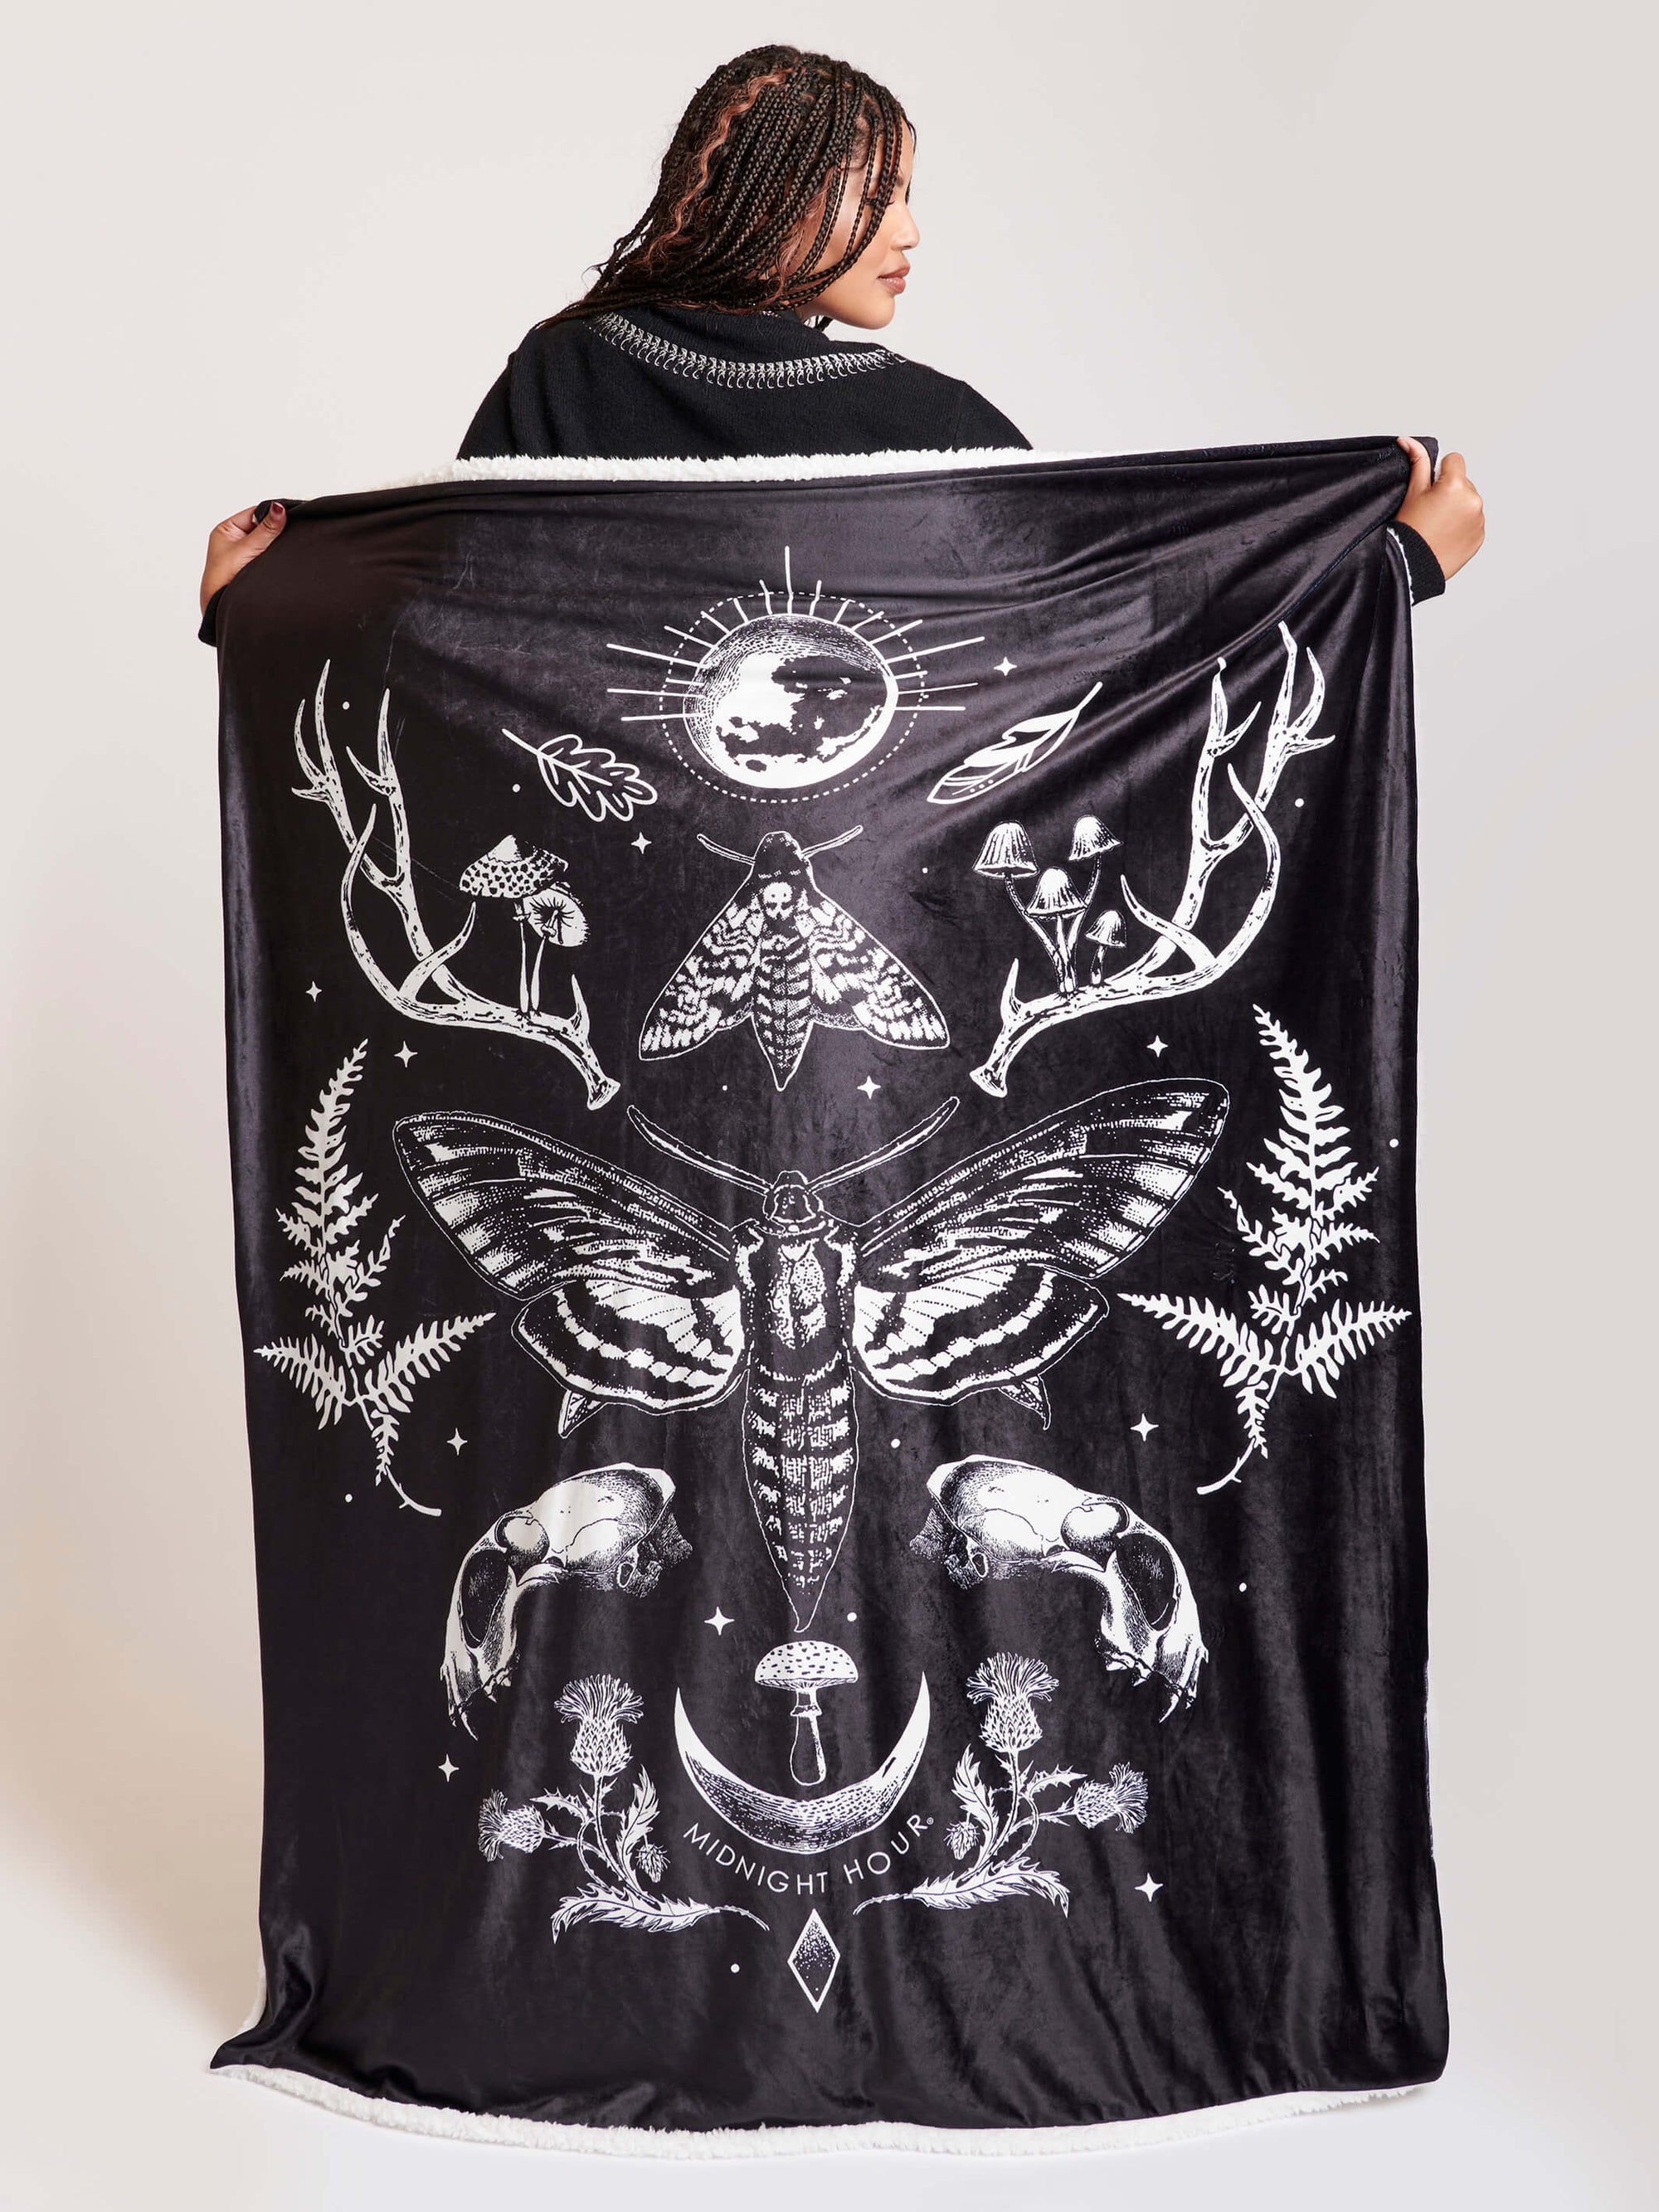 black blanket with white forest findings and deathmoth art